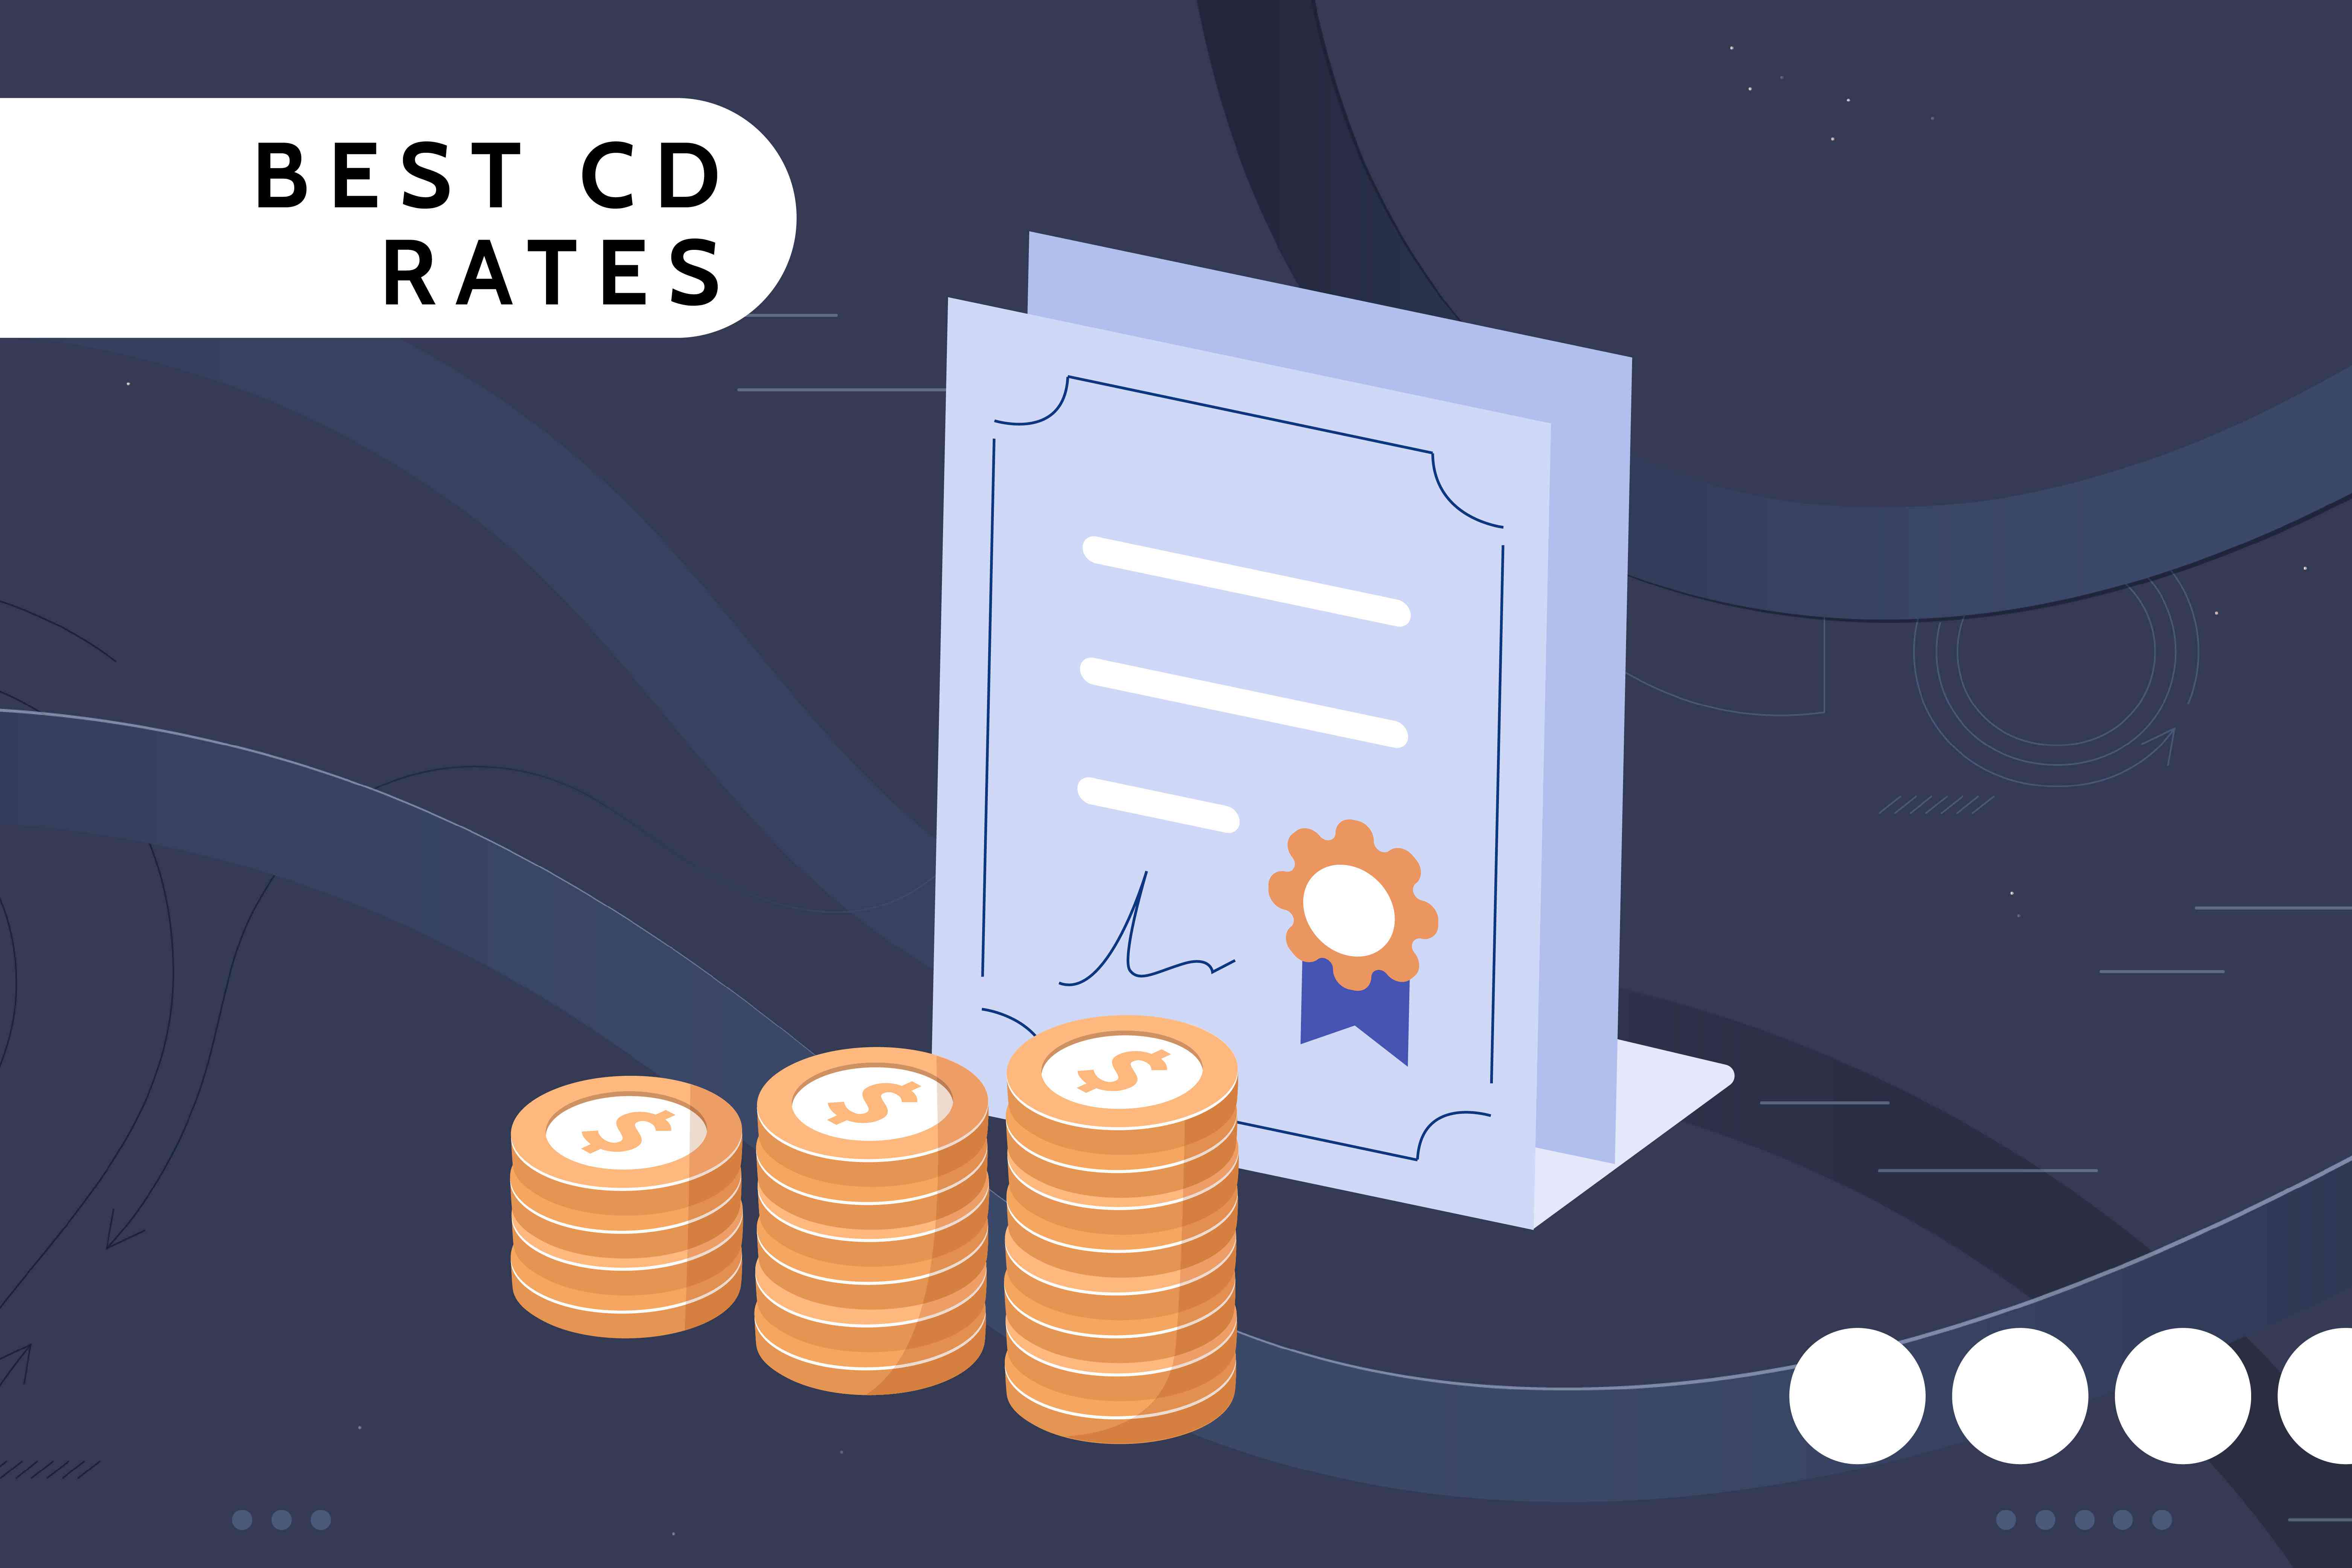 Investopedia custom visual asset showing stacks of change and a certificate, with the title Best CD Rates